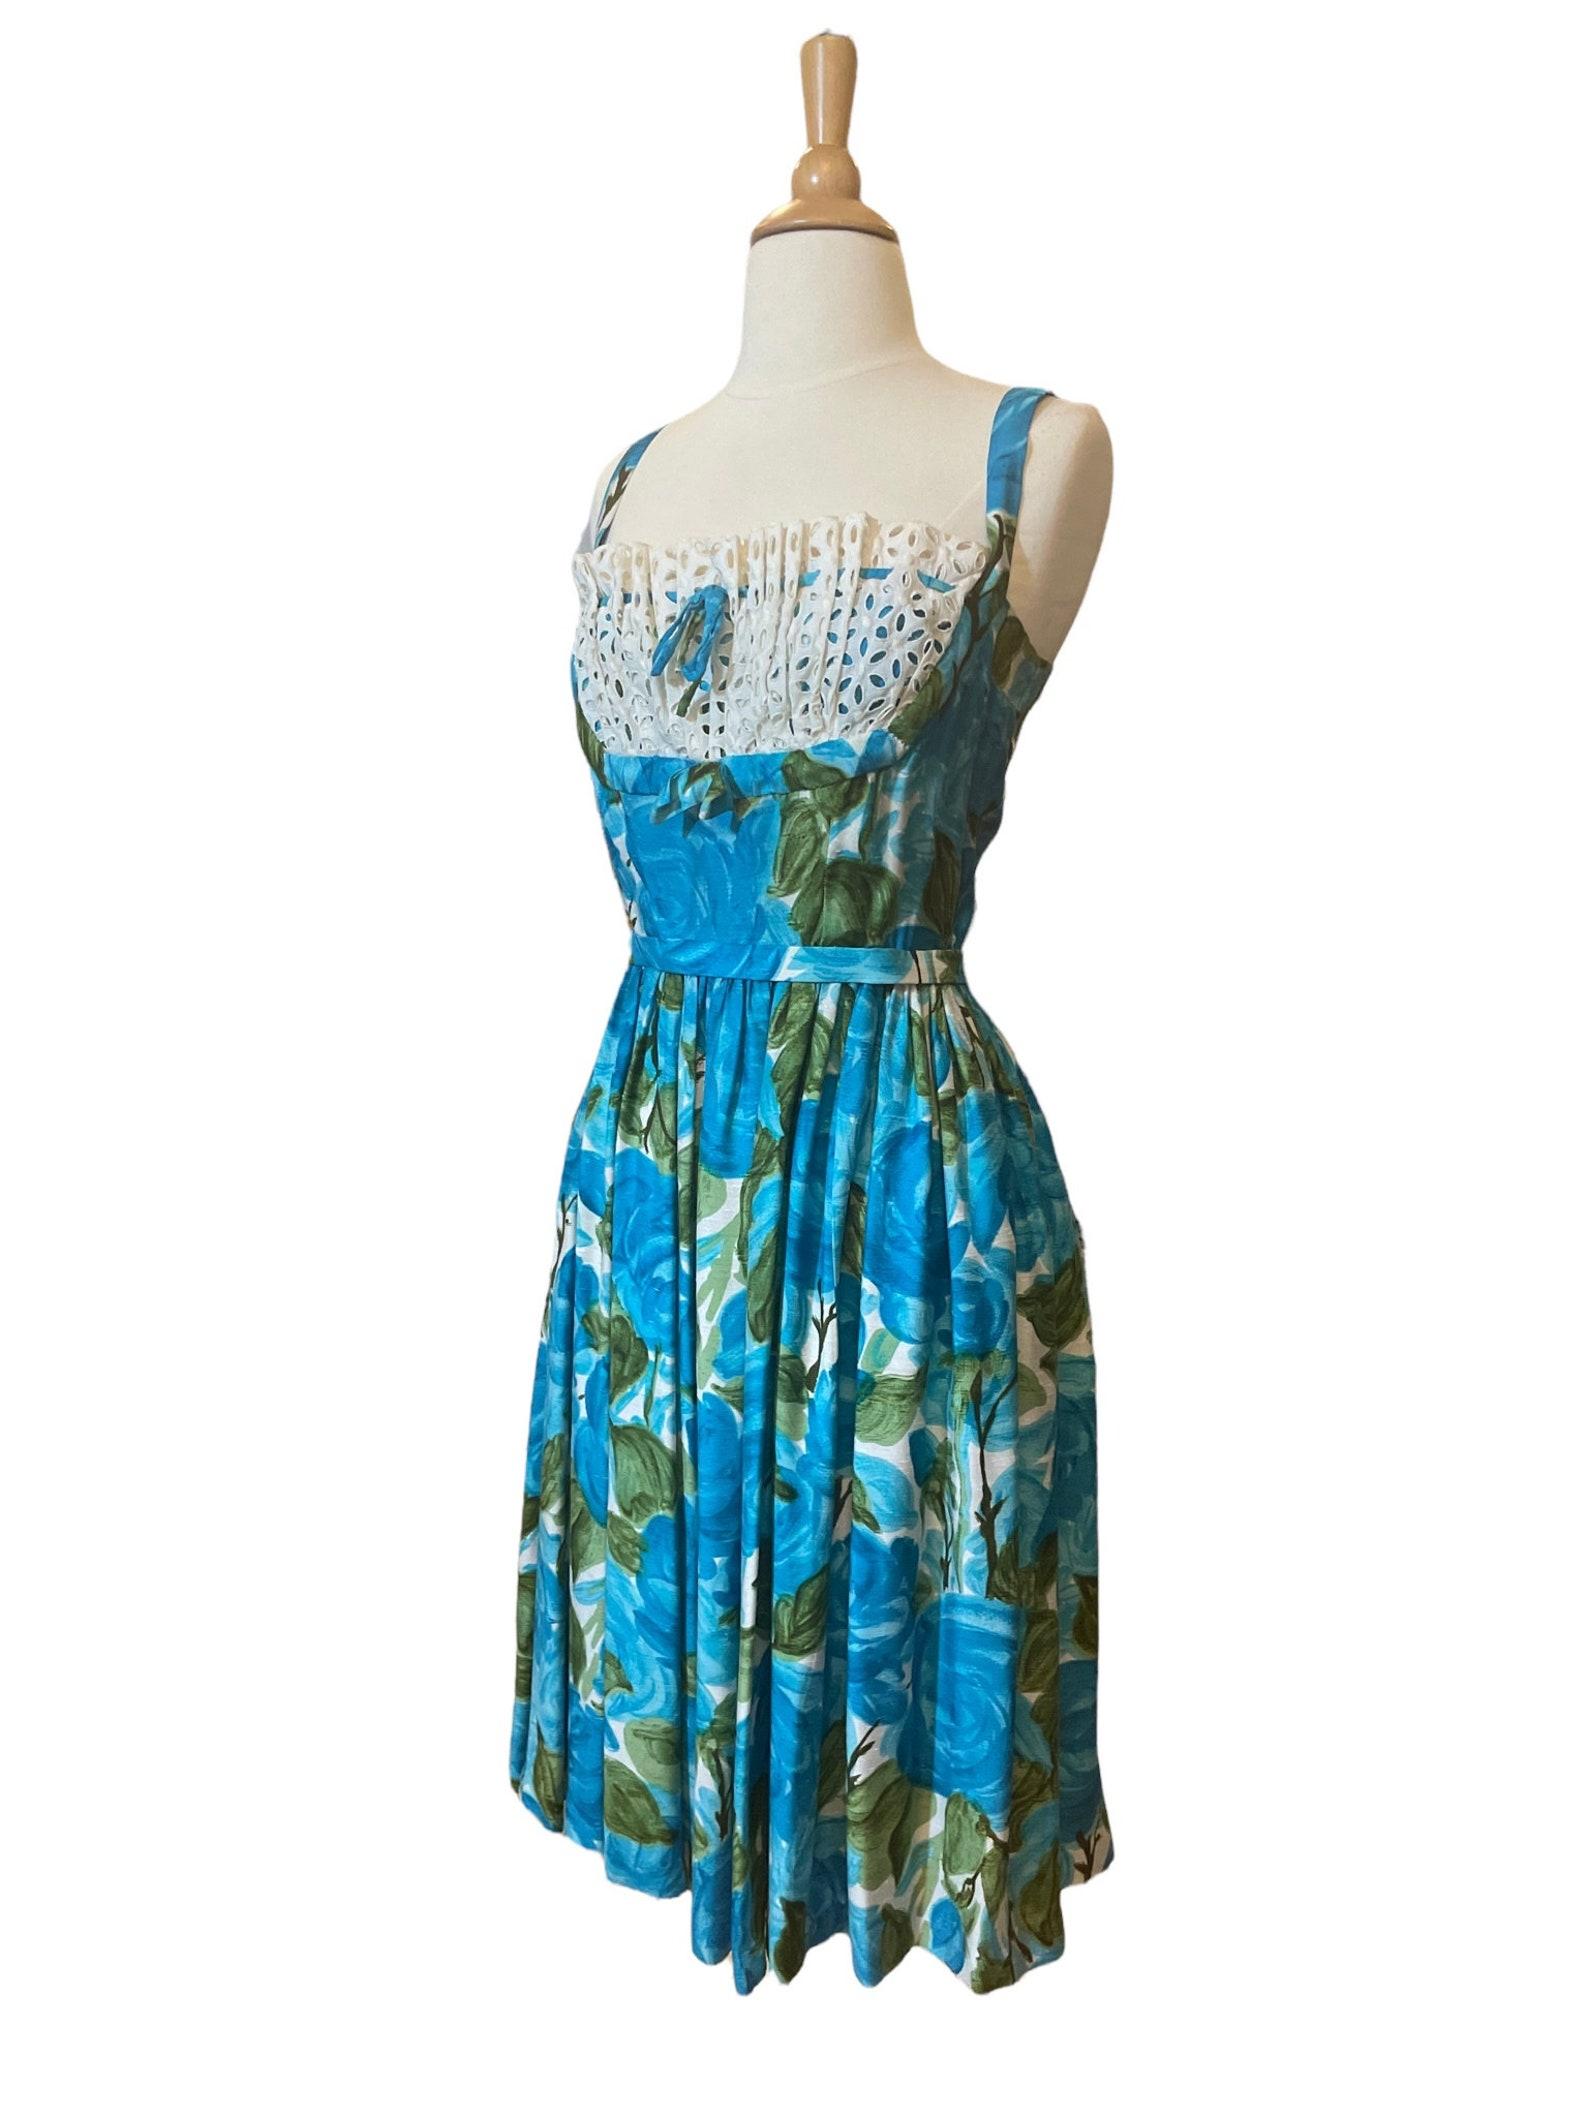 Blue and Green Watercolor Floral Sun Dress, Circa 1950s For Sale 2